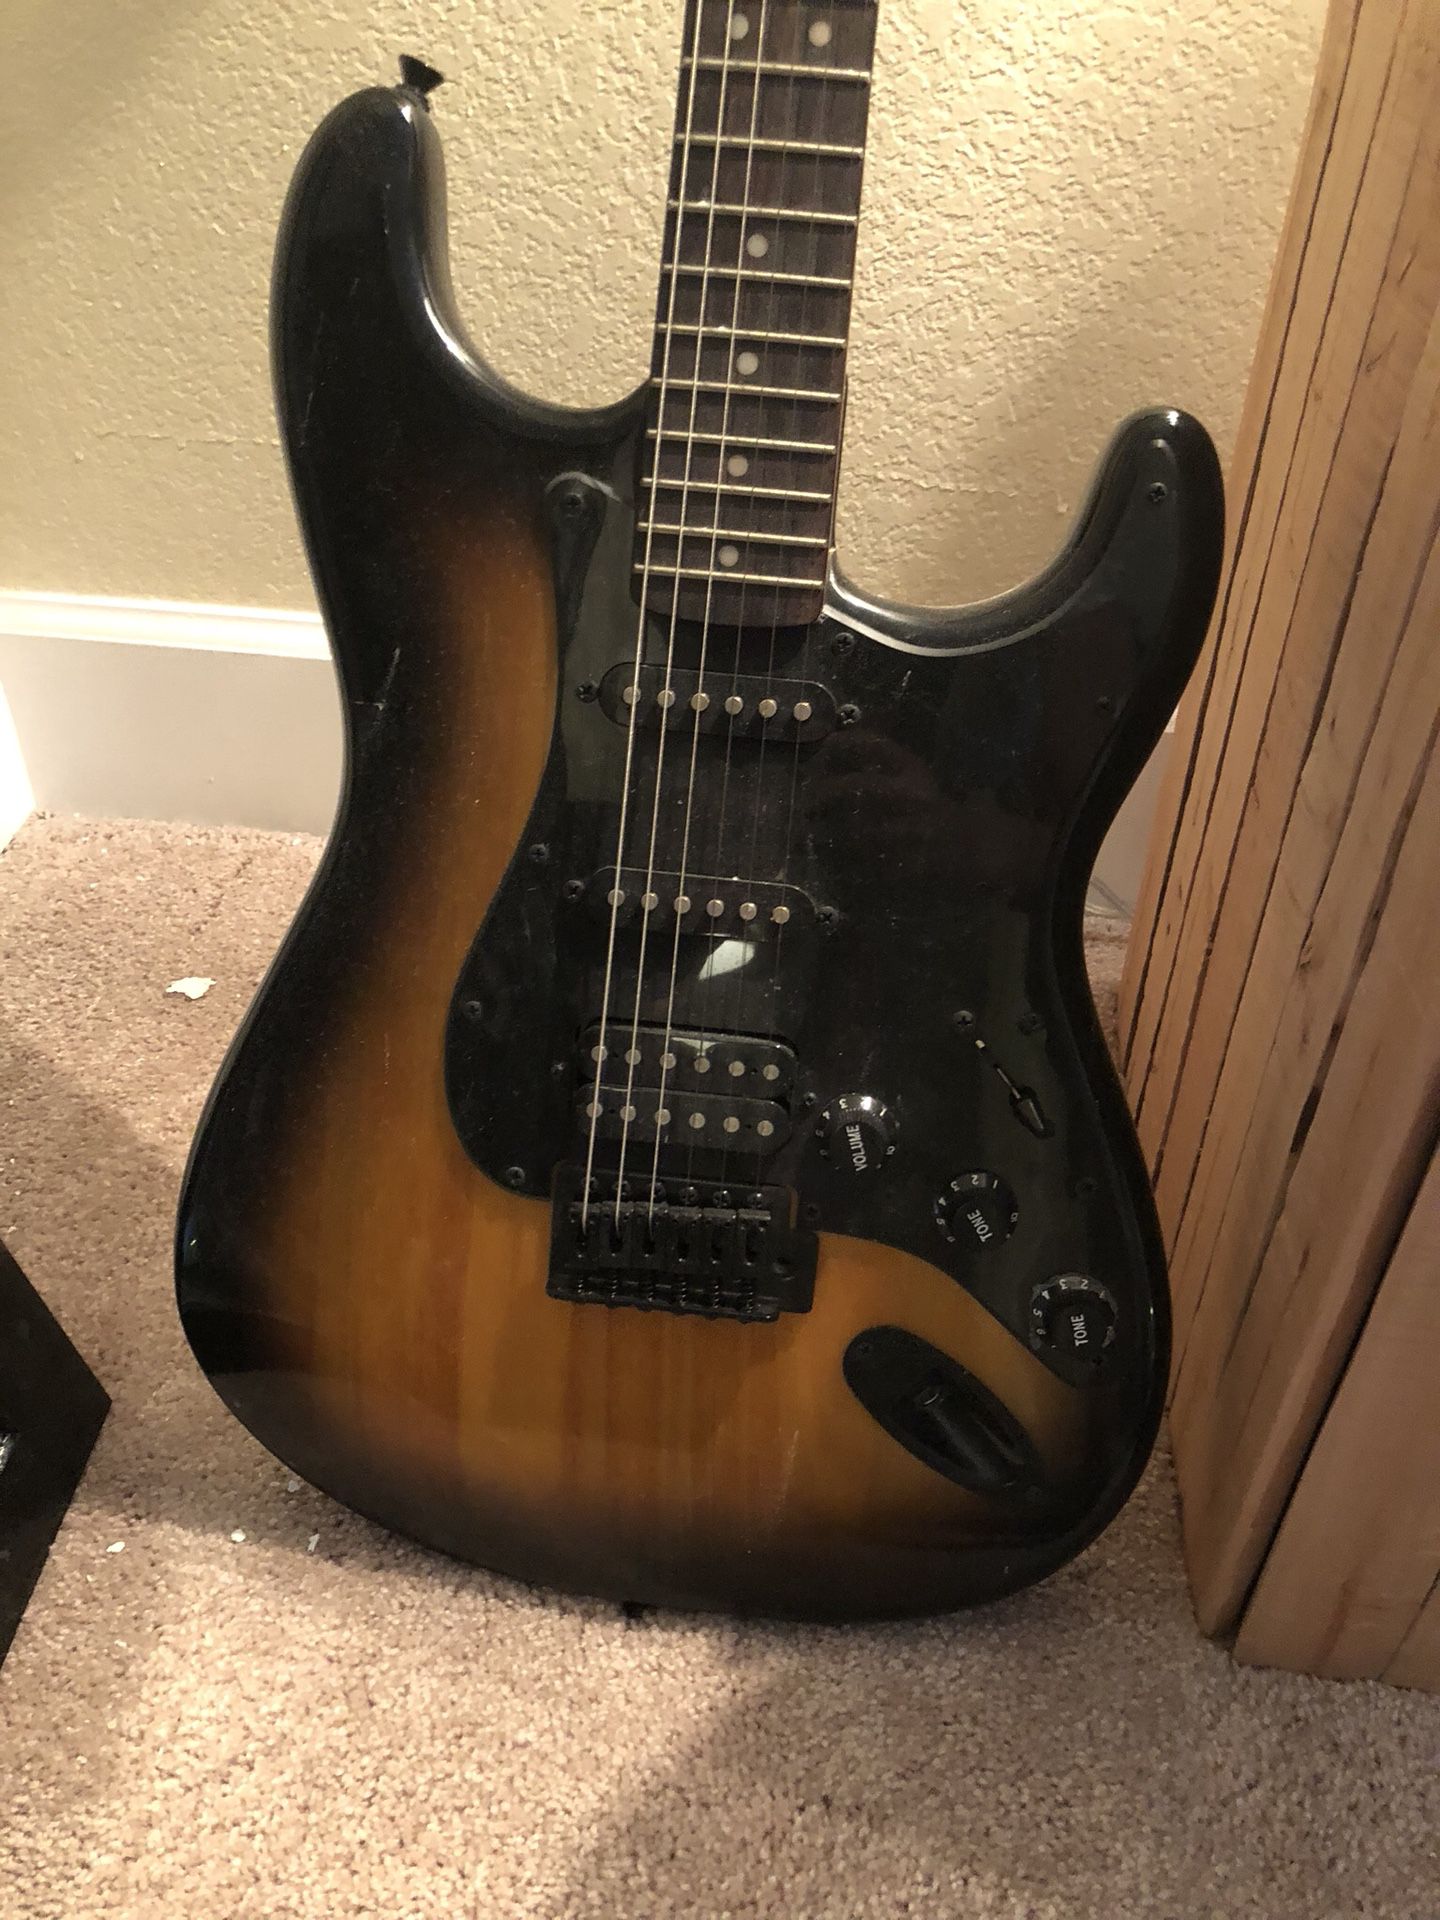 Electric Guitar + Amp - Barely used